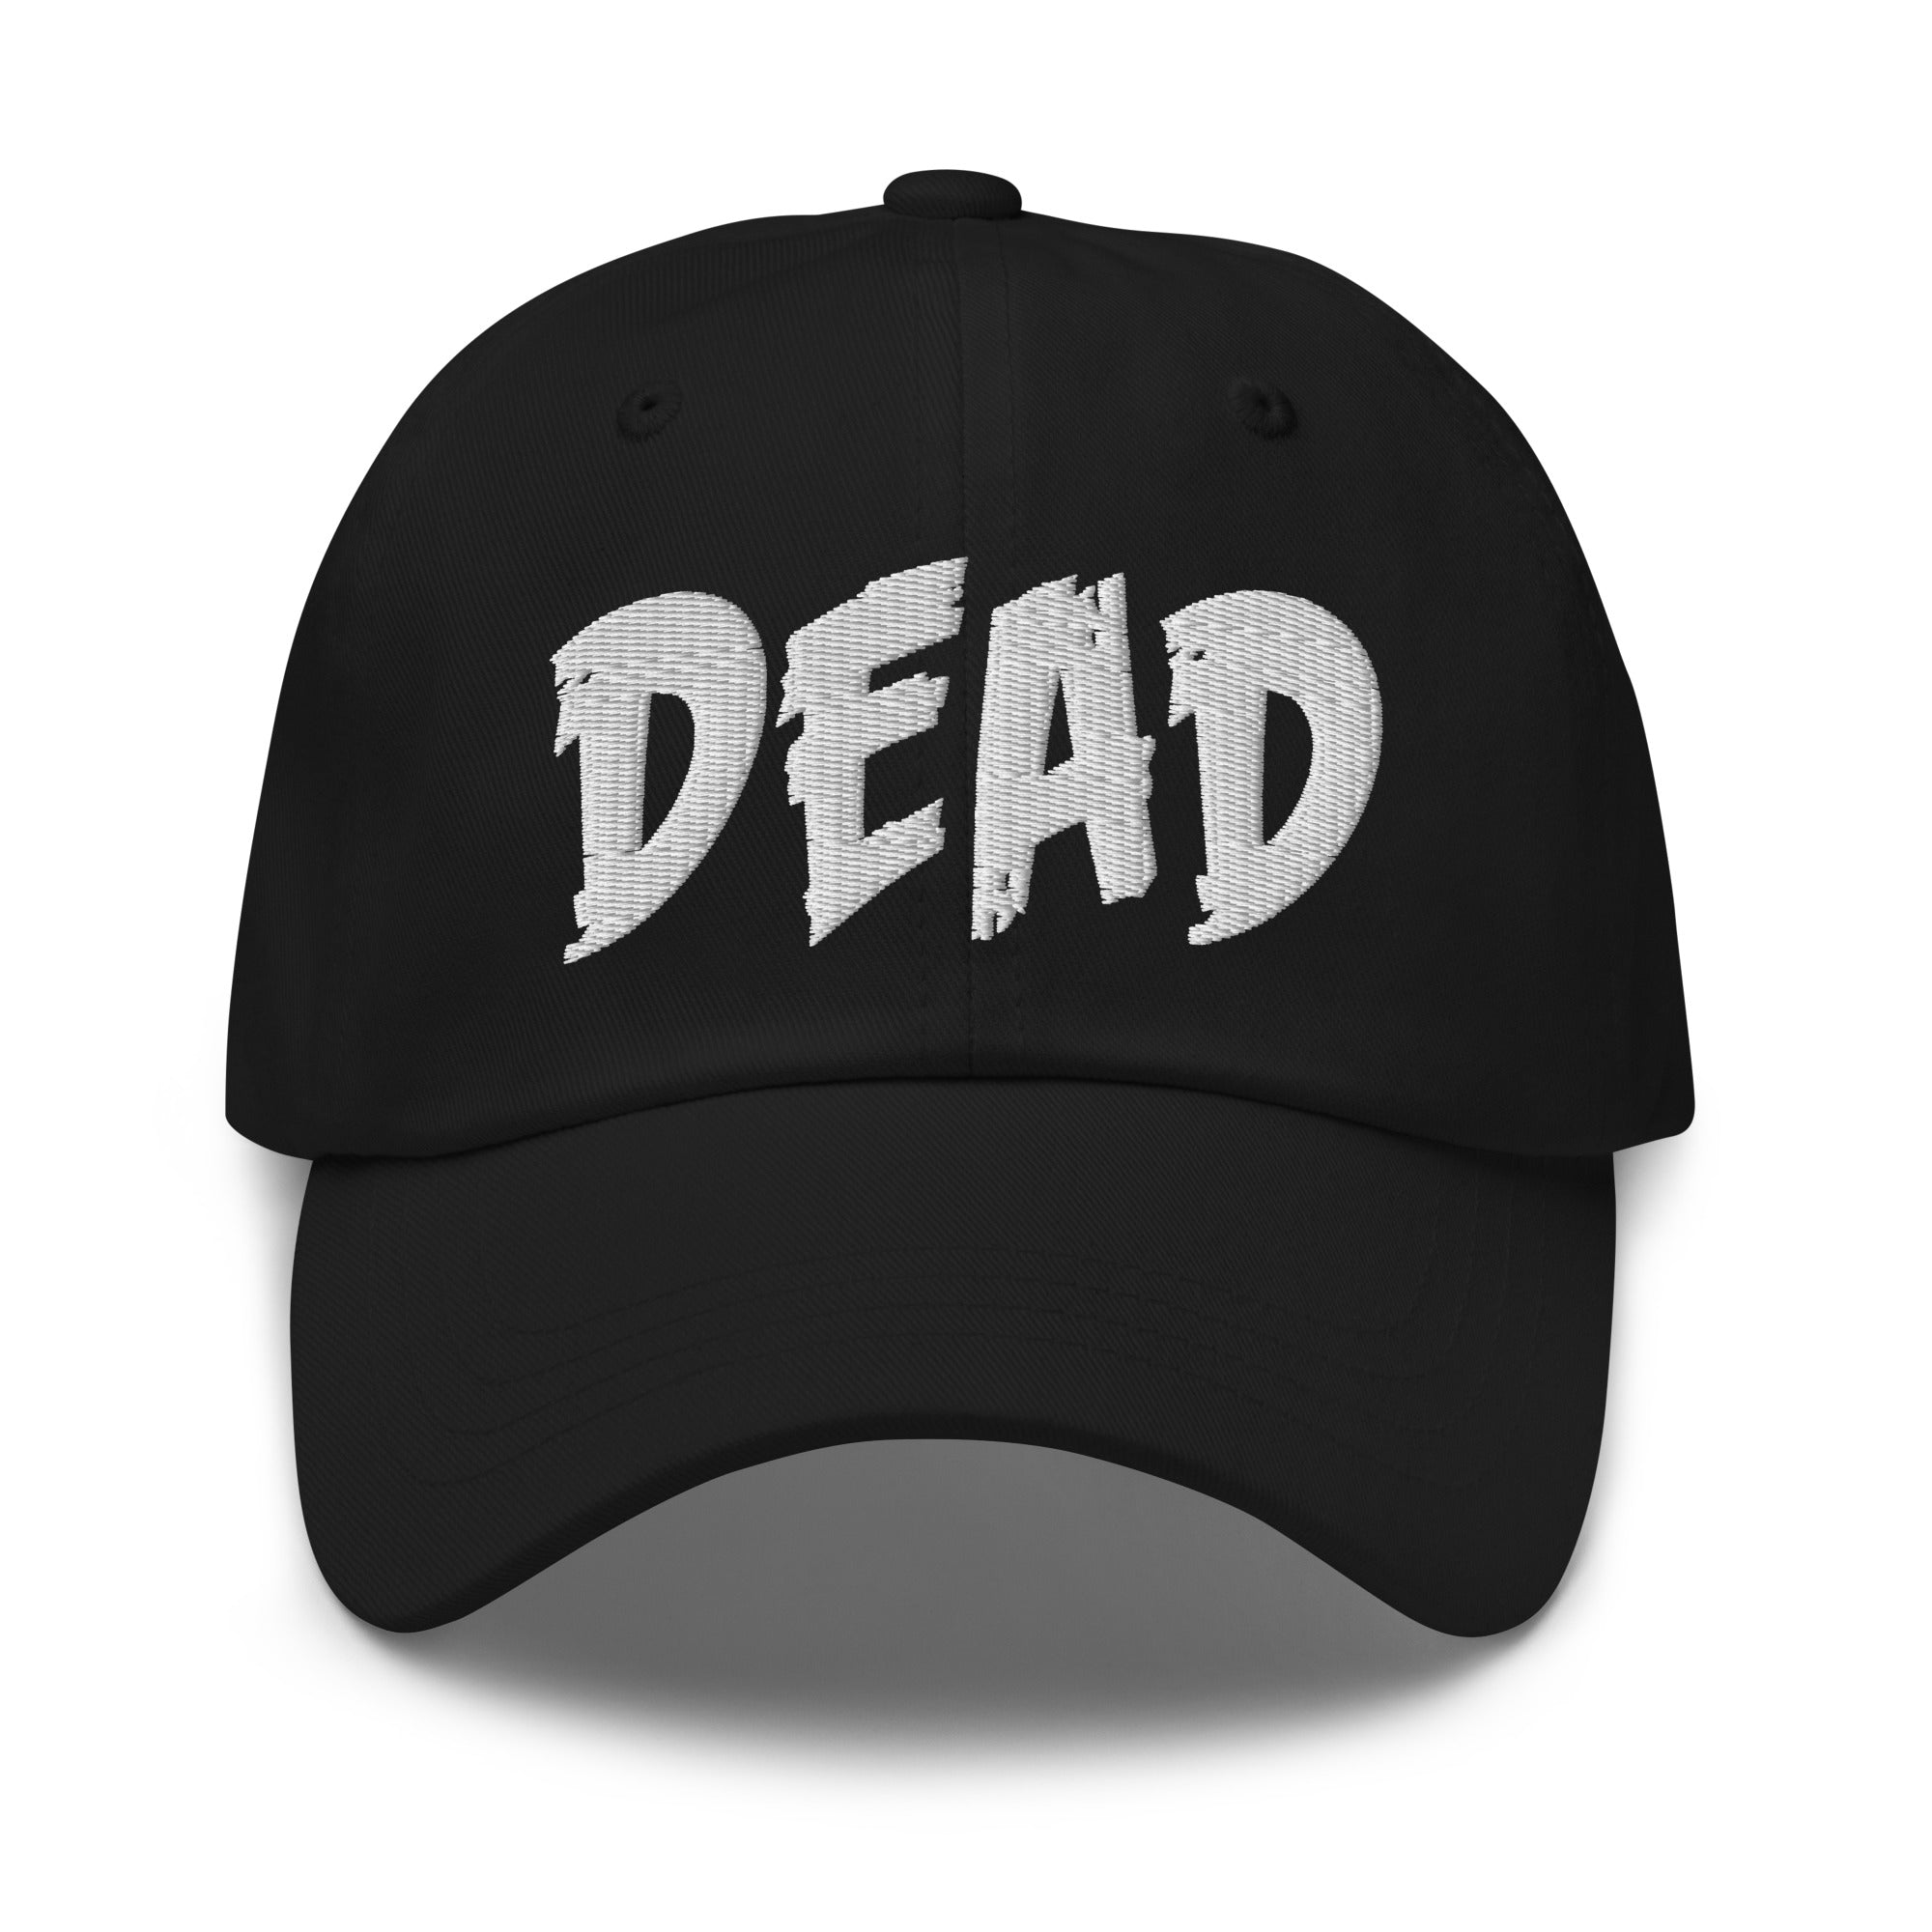 DEAD Emotional Depression Embroidered Baseball Cap White Thread Dad hat - Edge of Life Designs